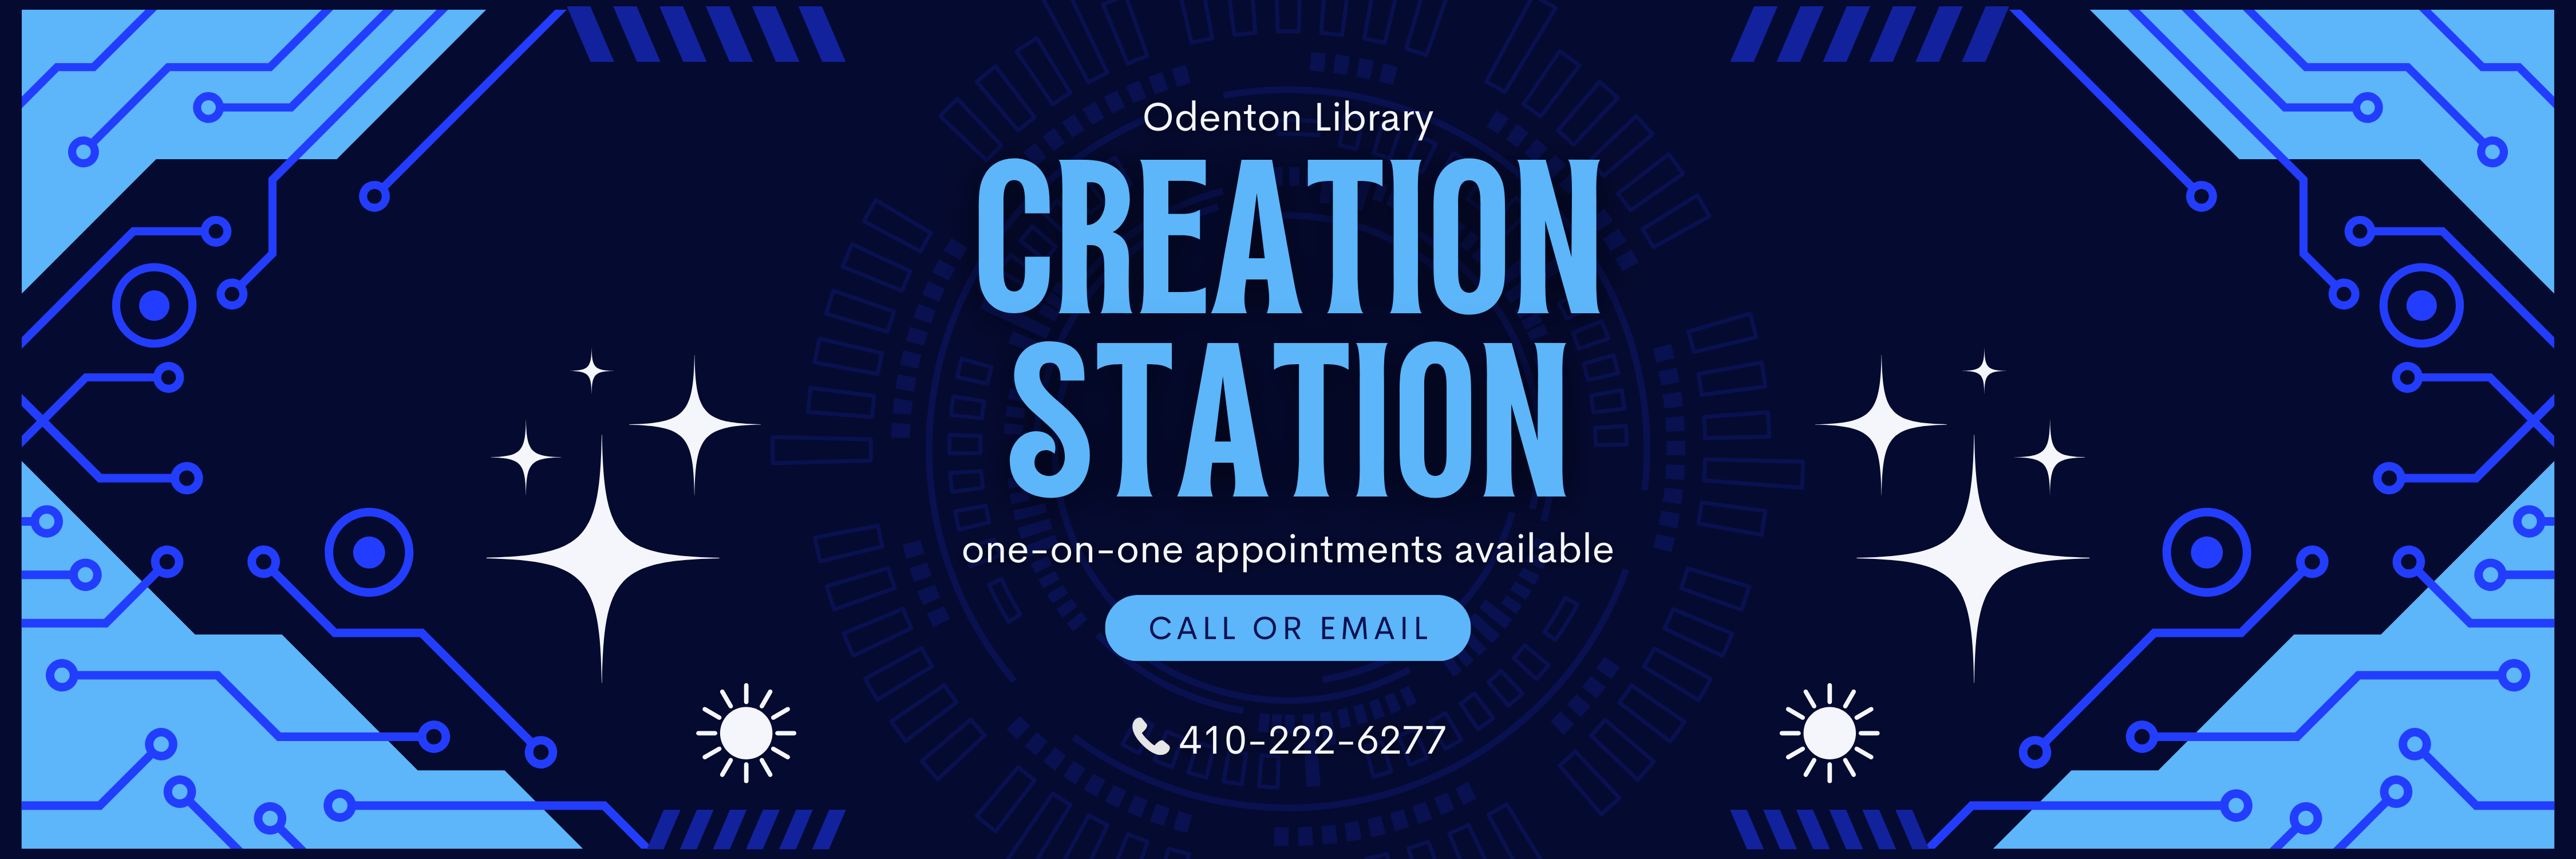 Text: Odenton Library Creation Station. One-on one appointments available. Call or Email. 410-222-6277